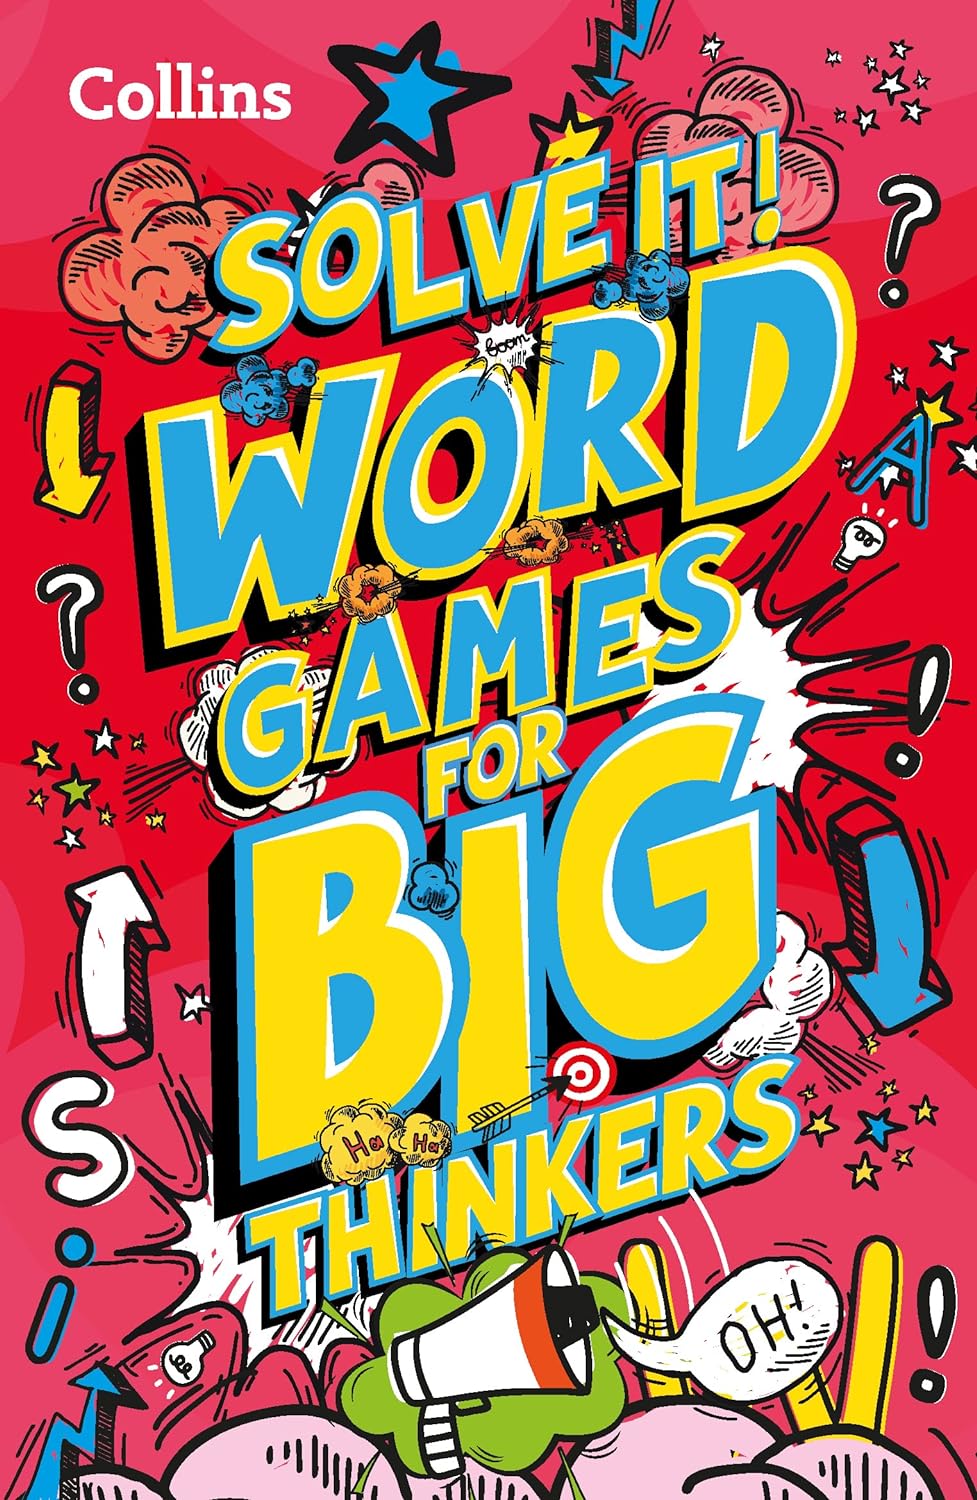 Word Games For Big Thinkers